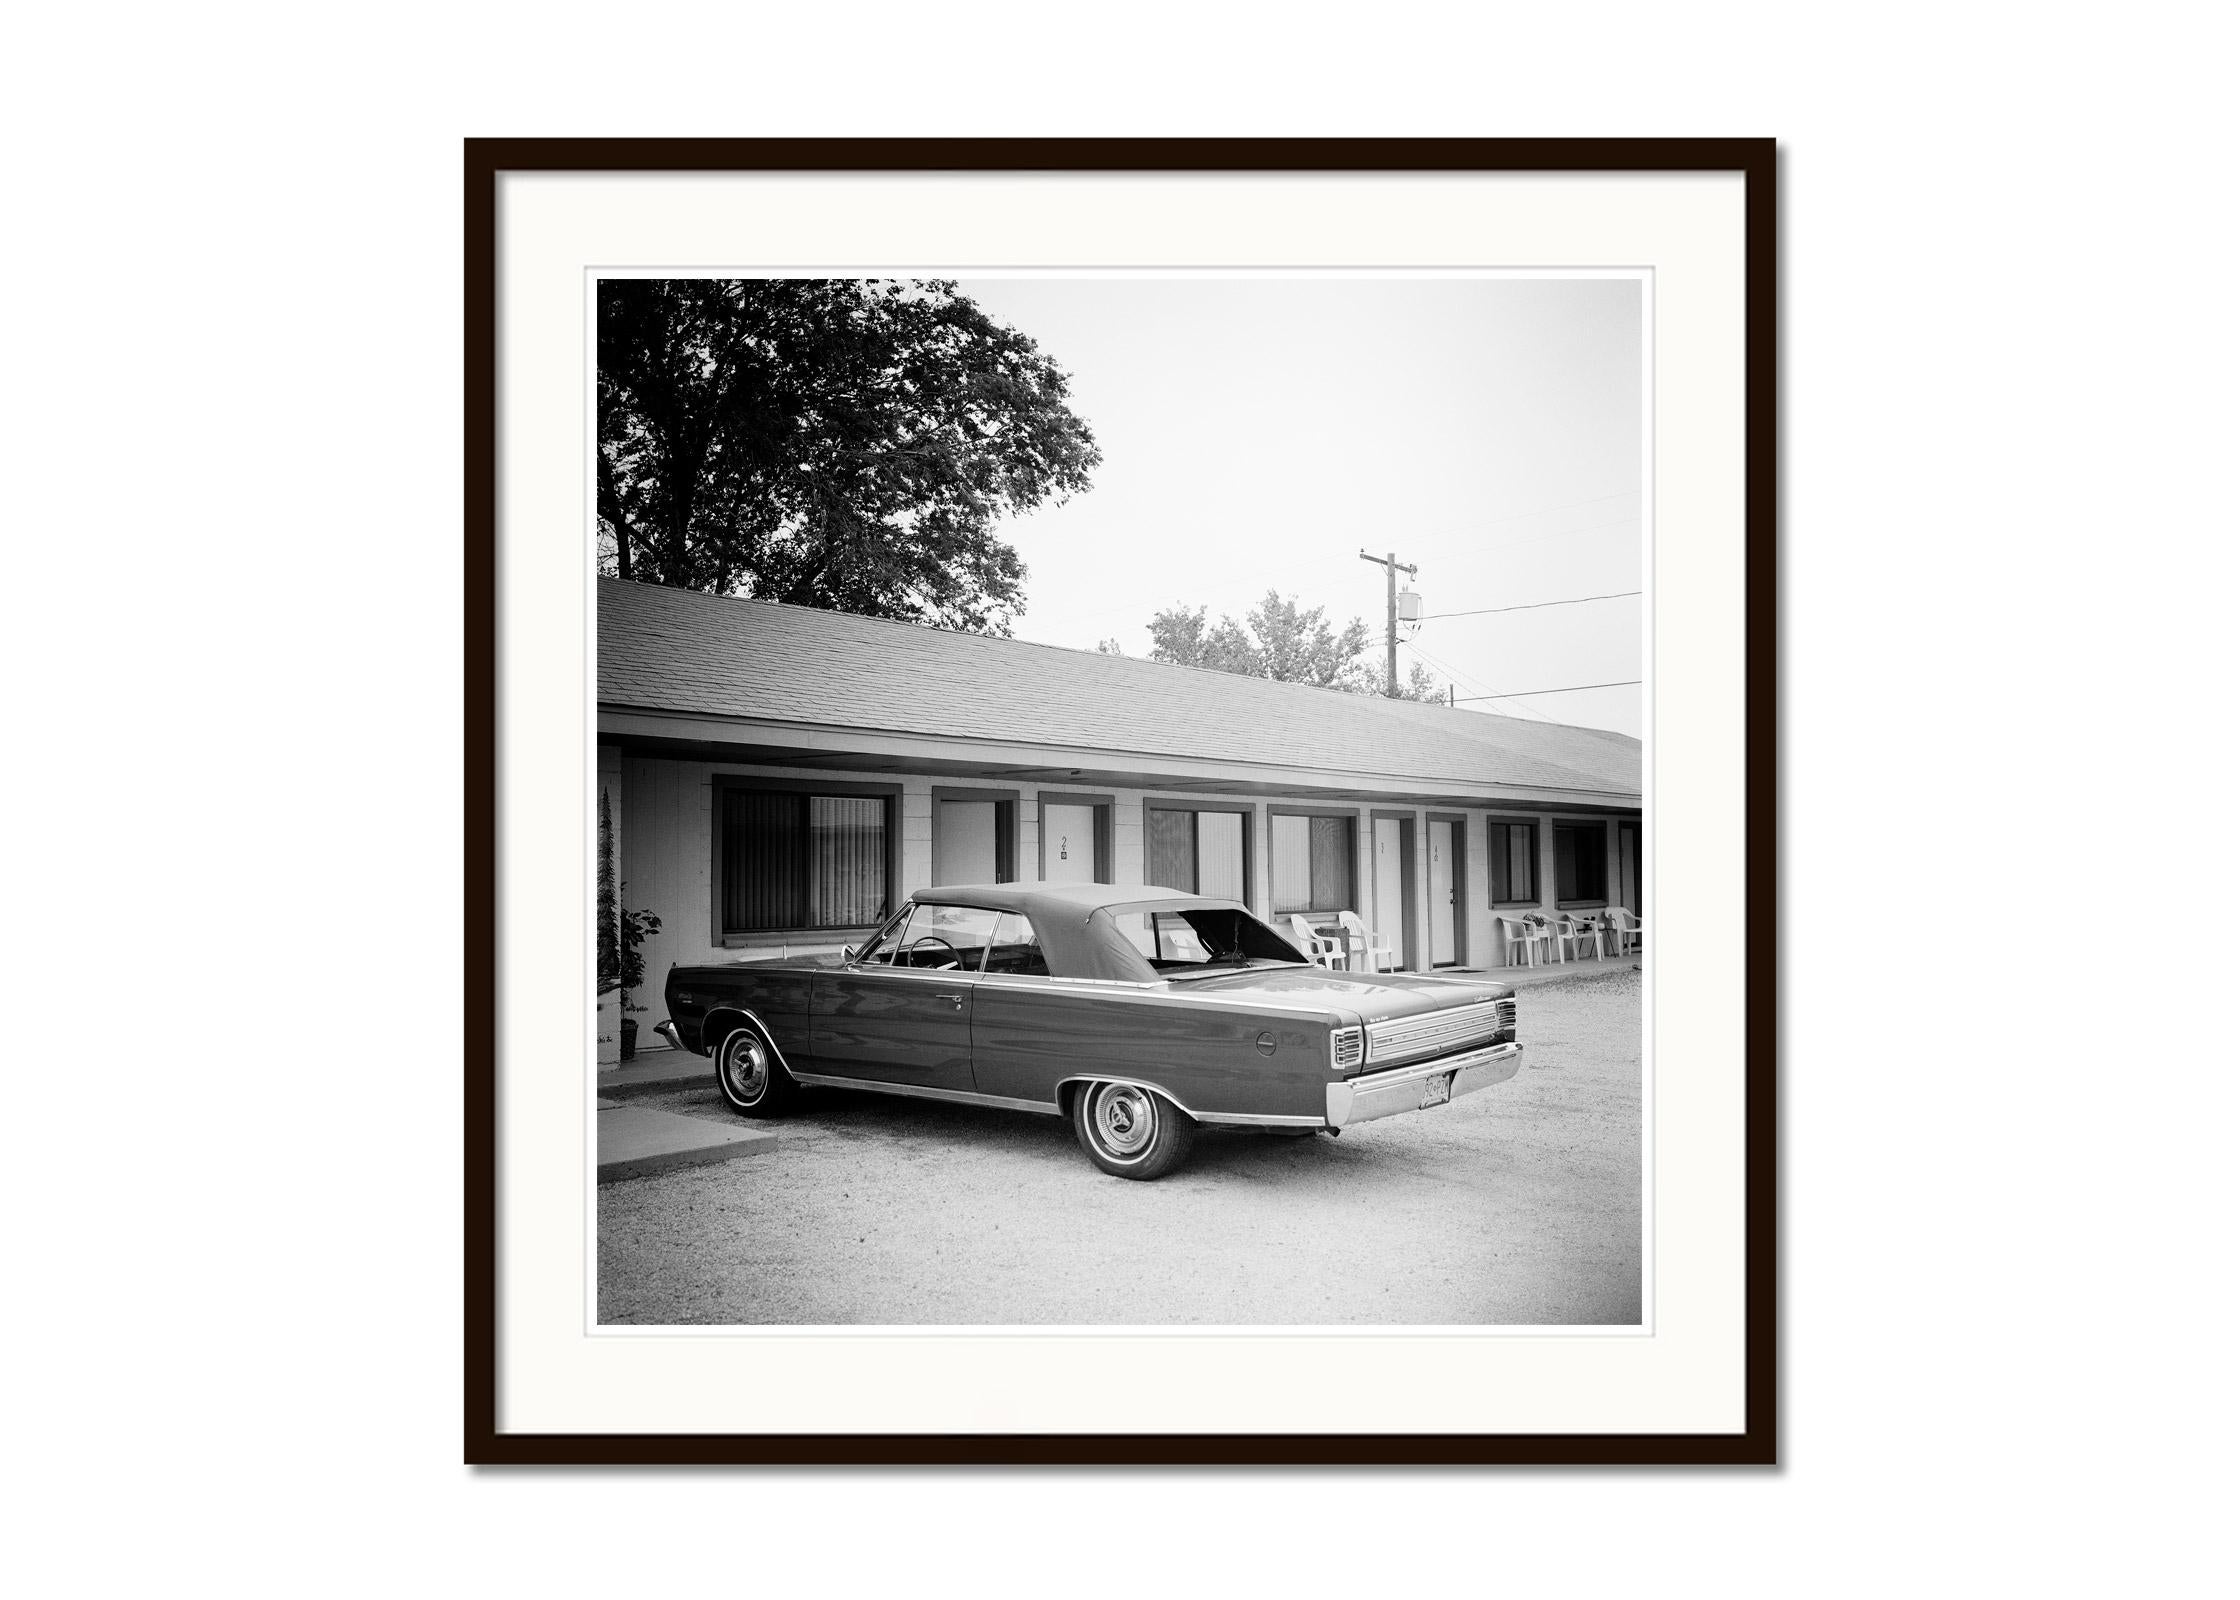 1967 Plymouth, Oldtimer, Route 66, USA, black white art landscape photography - Gray Landscape Photograph by Gerald Berghammer